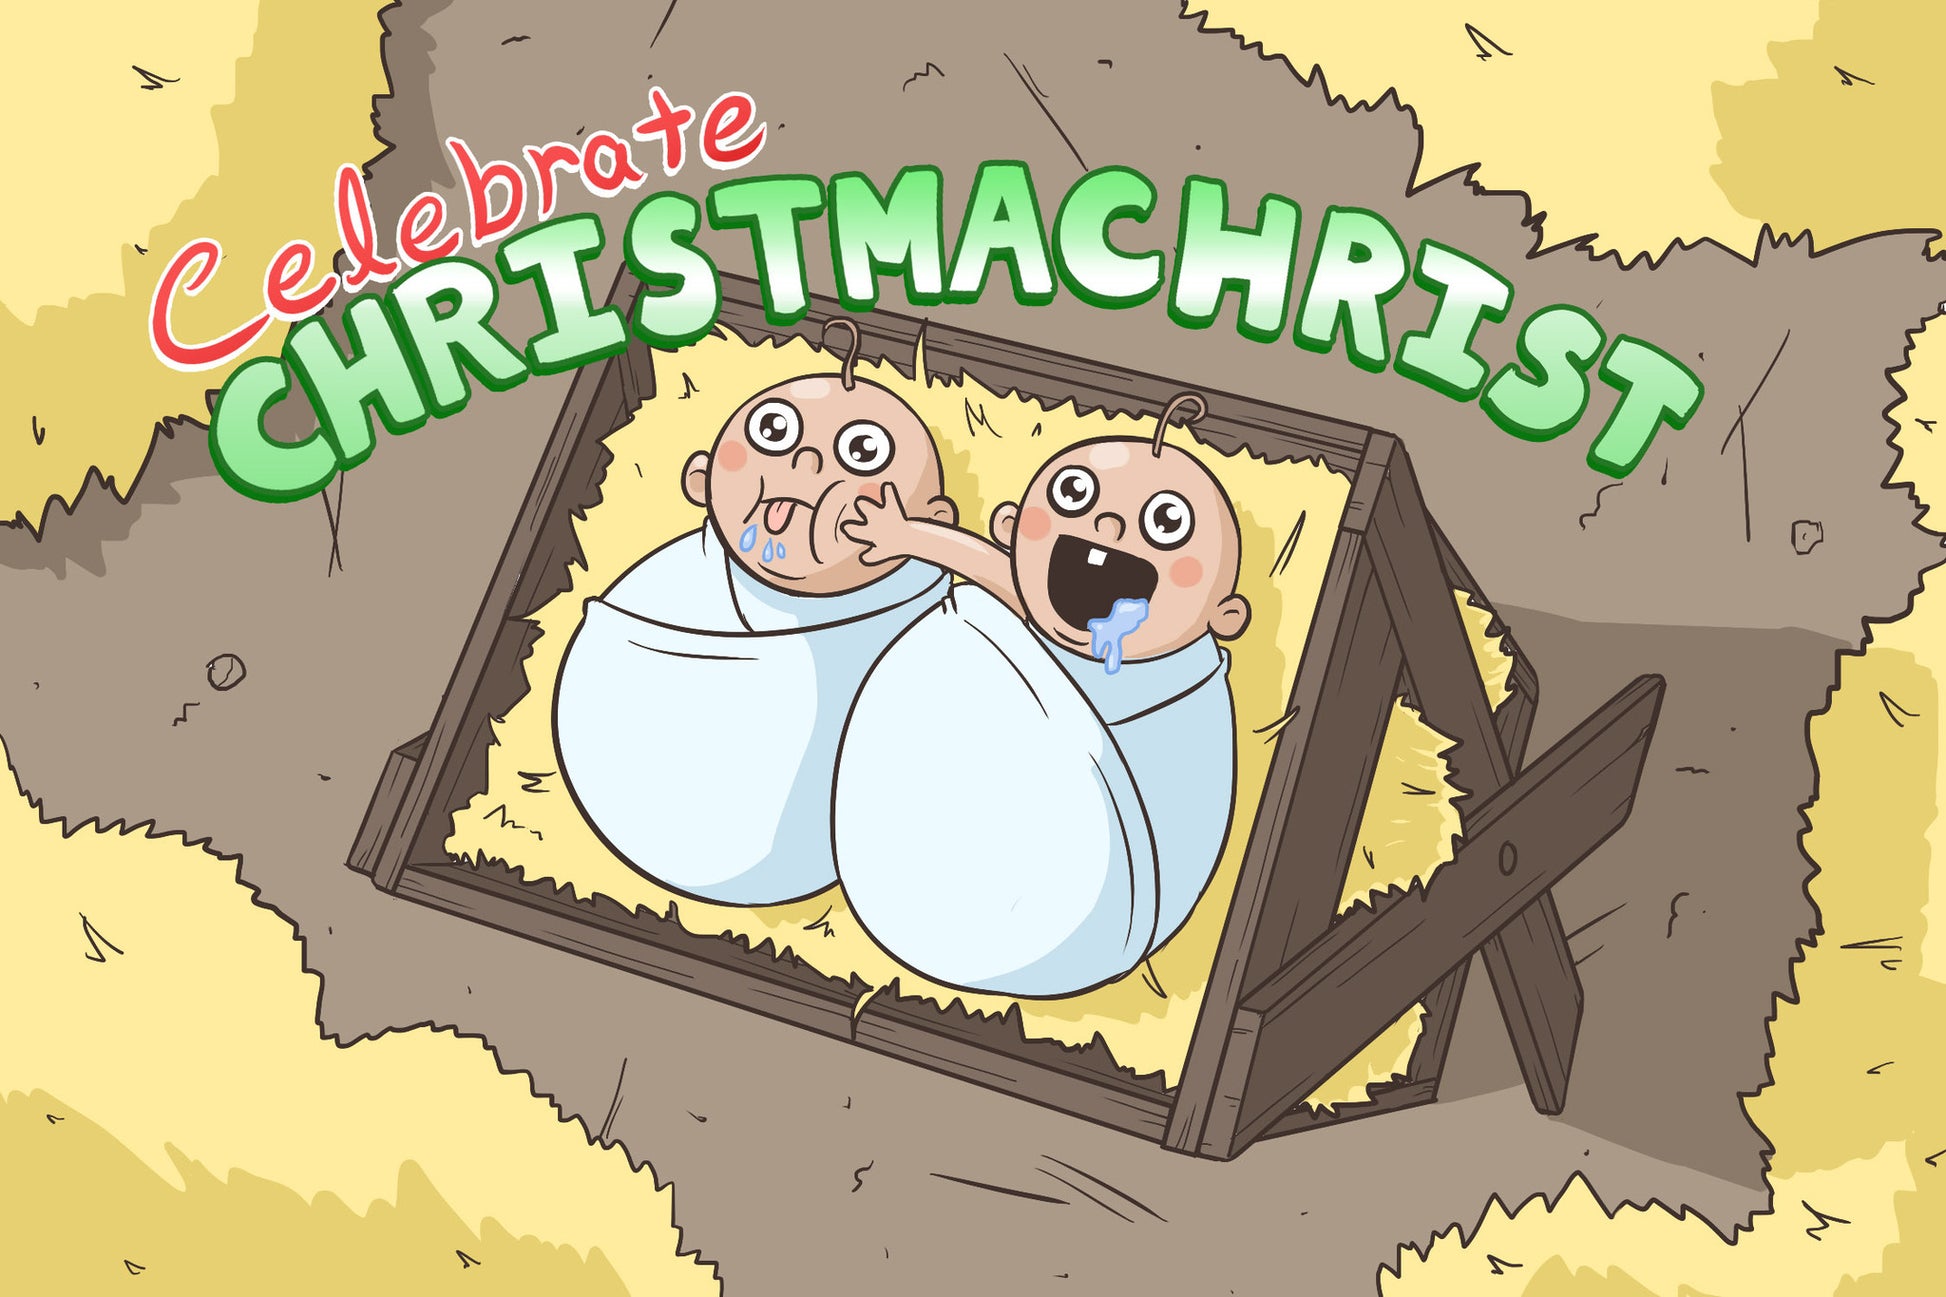 Christmachrist Holiday Card Set from SMBC - Webcomic Merchandise 